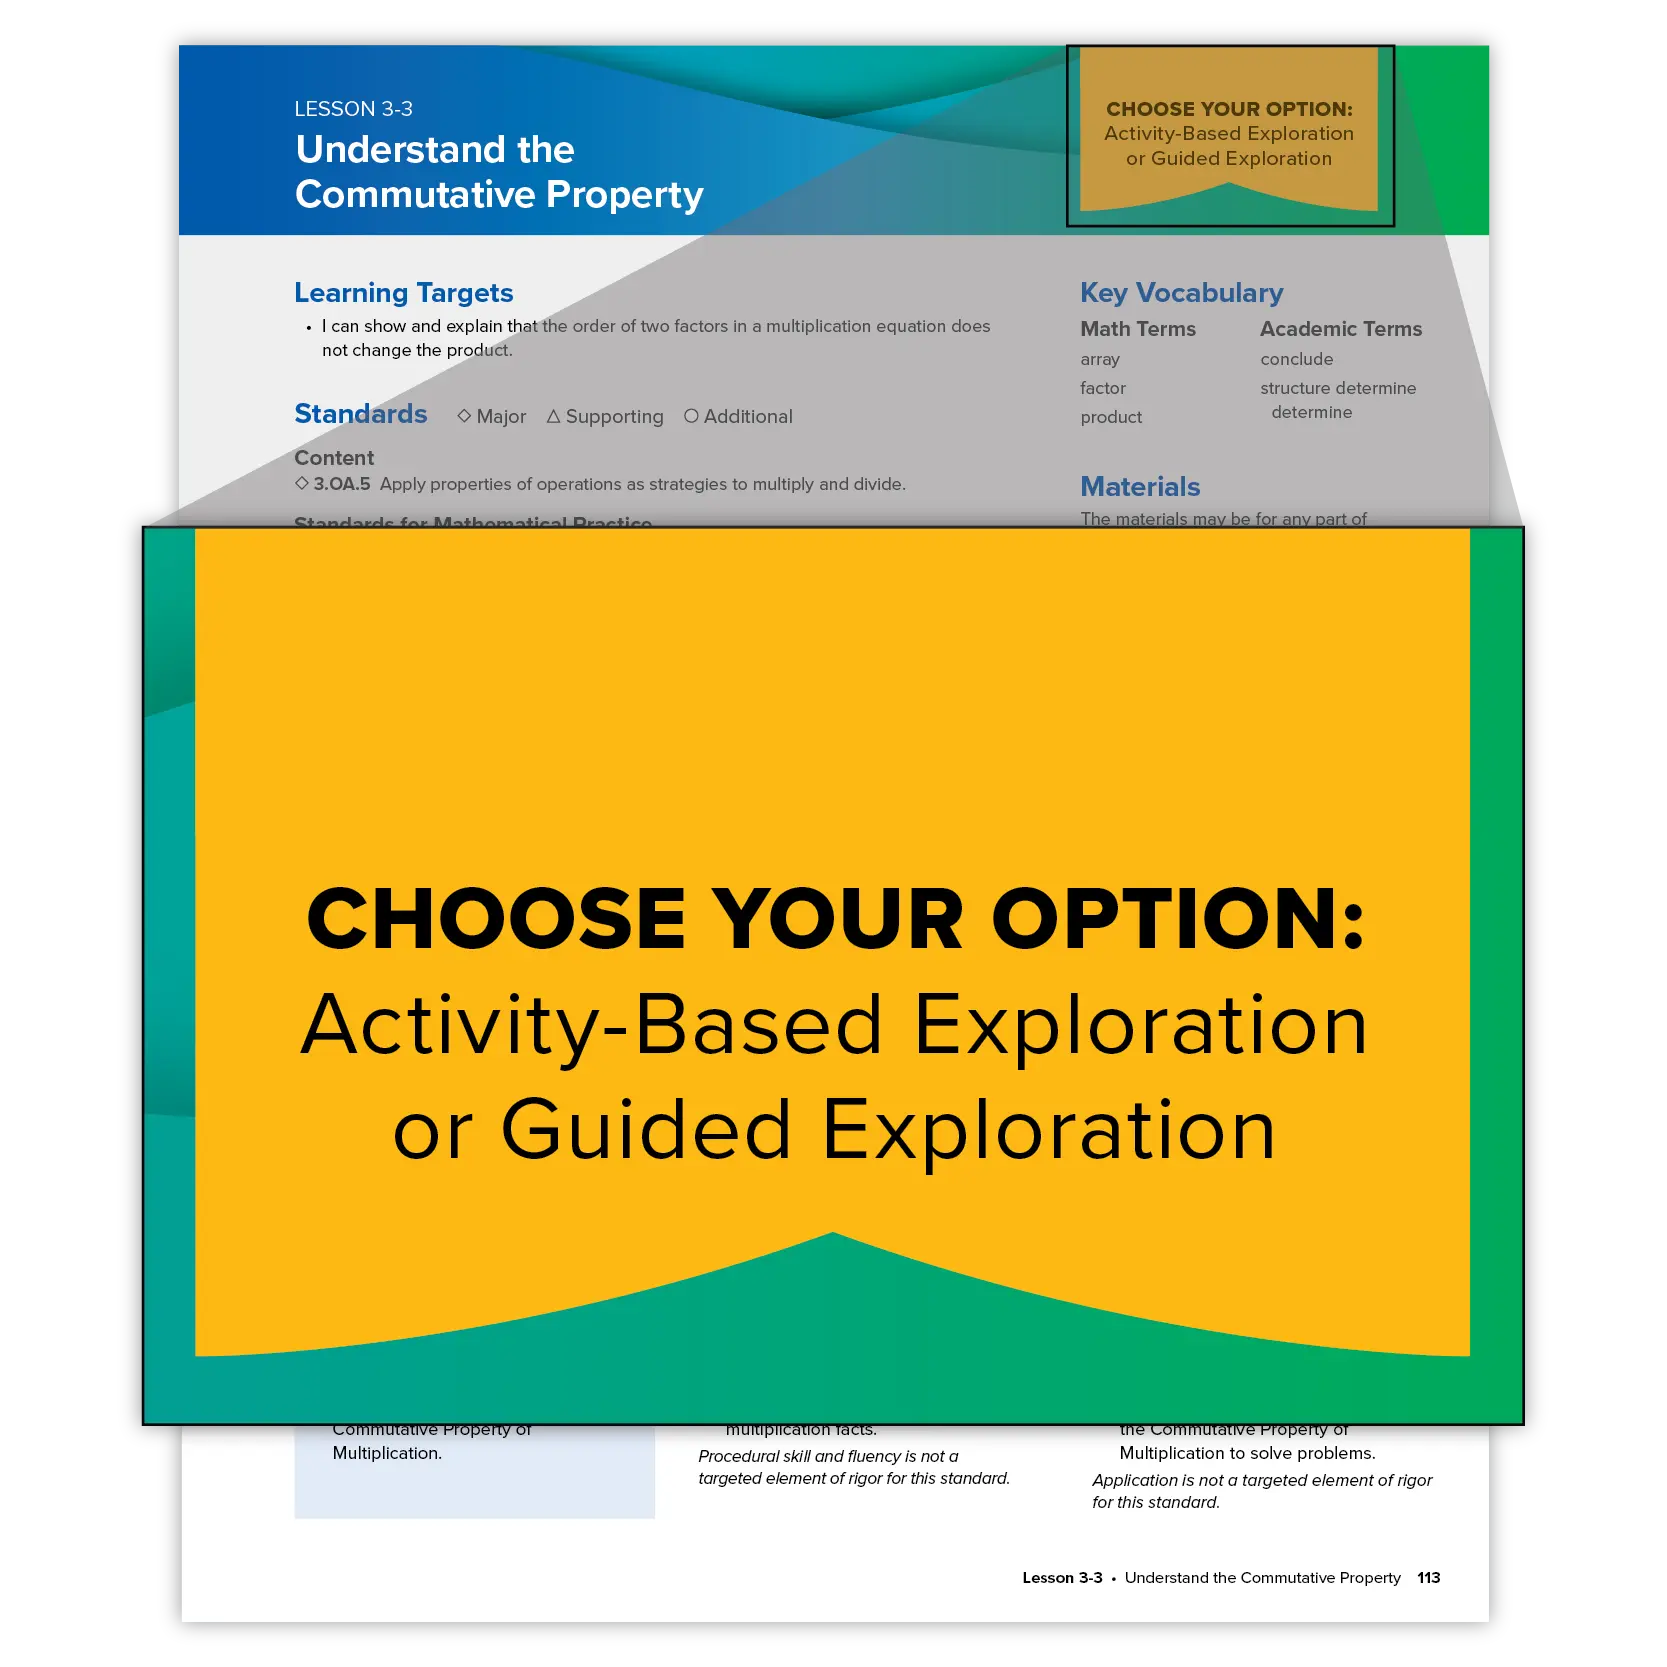 A highlighted except from the textbook says,  “CHOOSE YOUR OPTION: Activity-Based Exploration or Guided Exploration.”